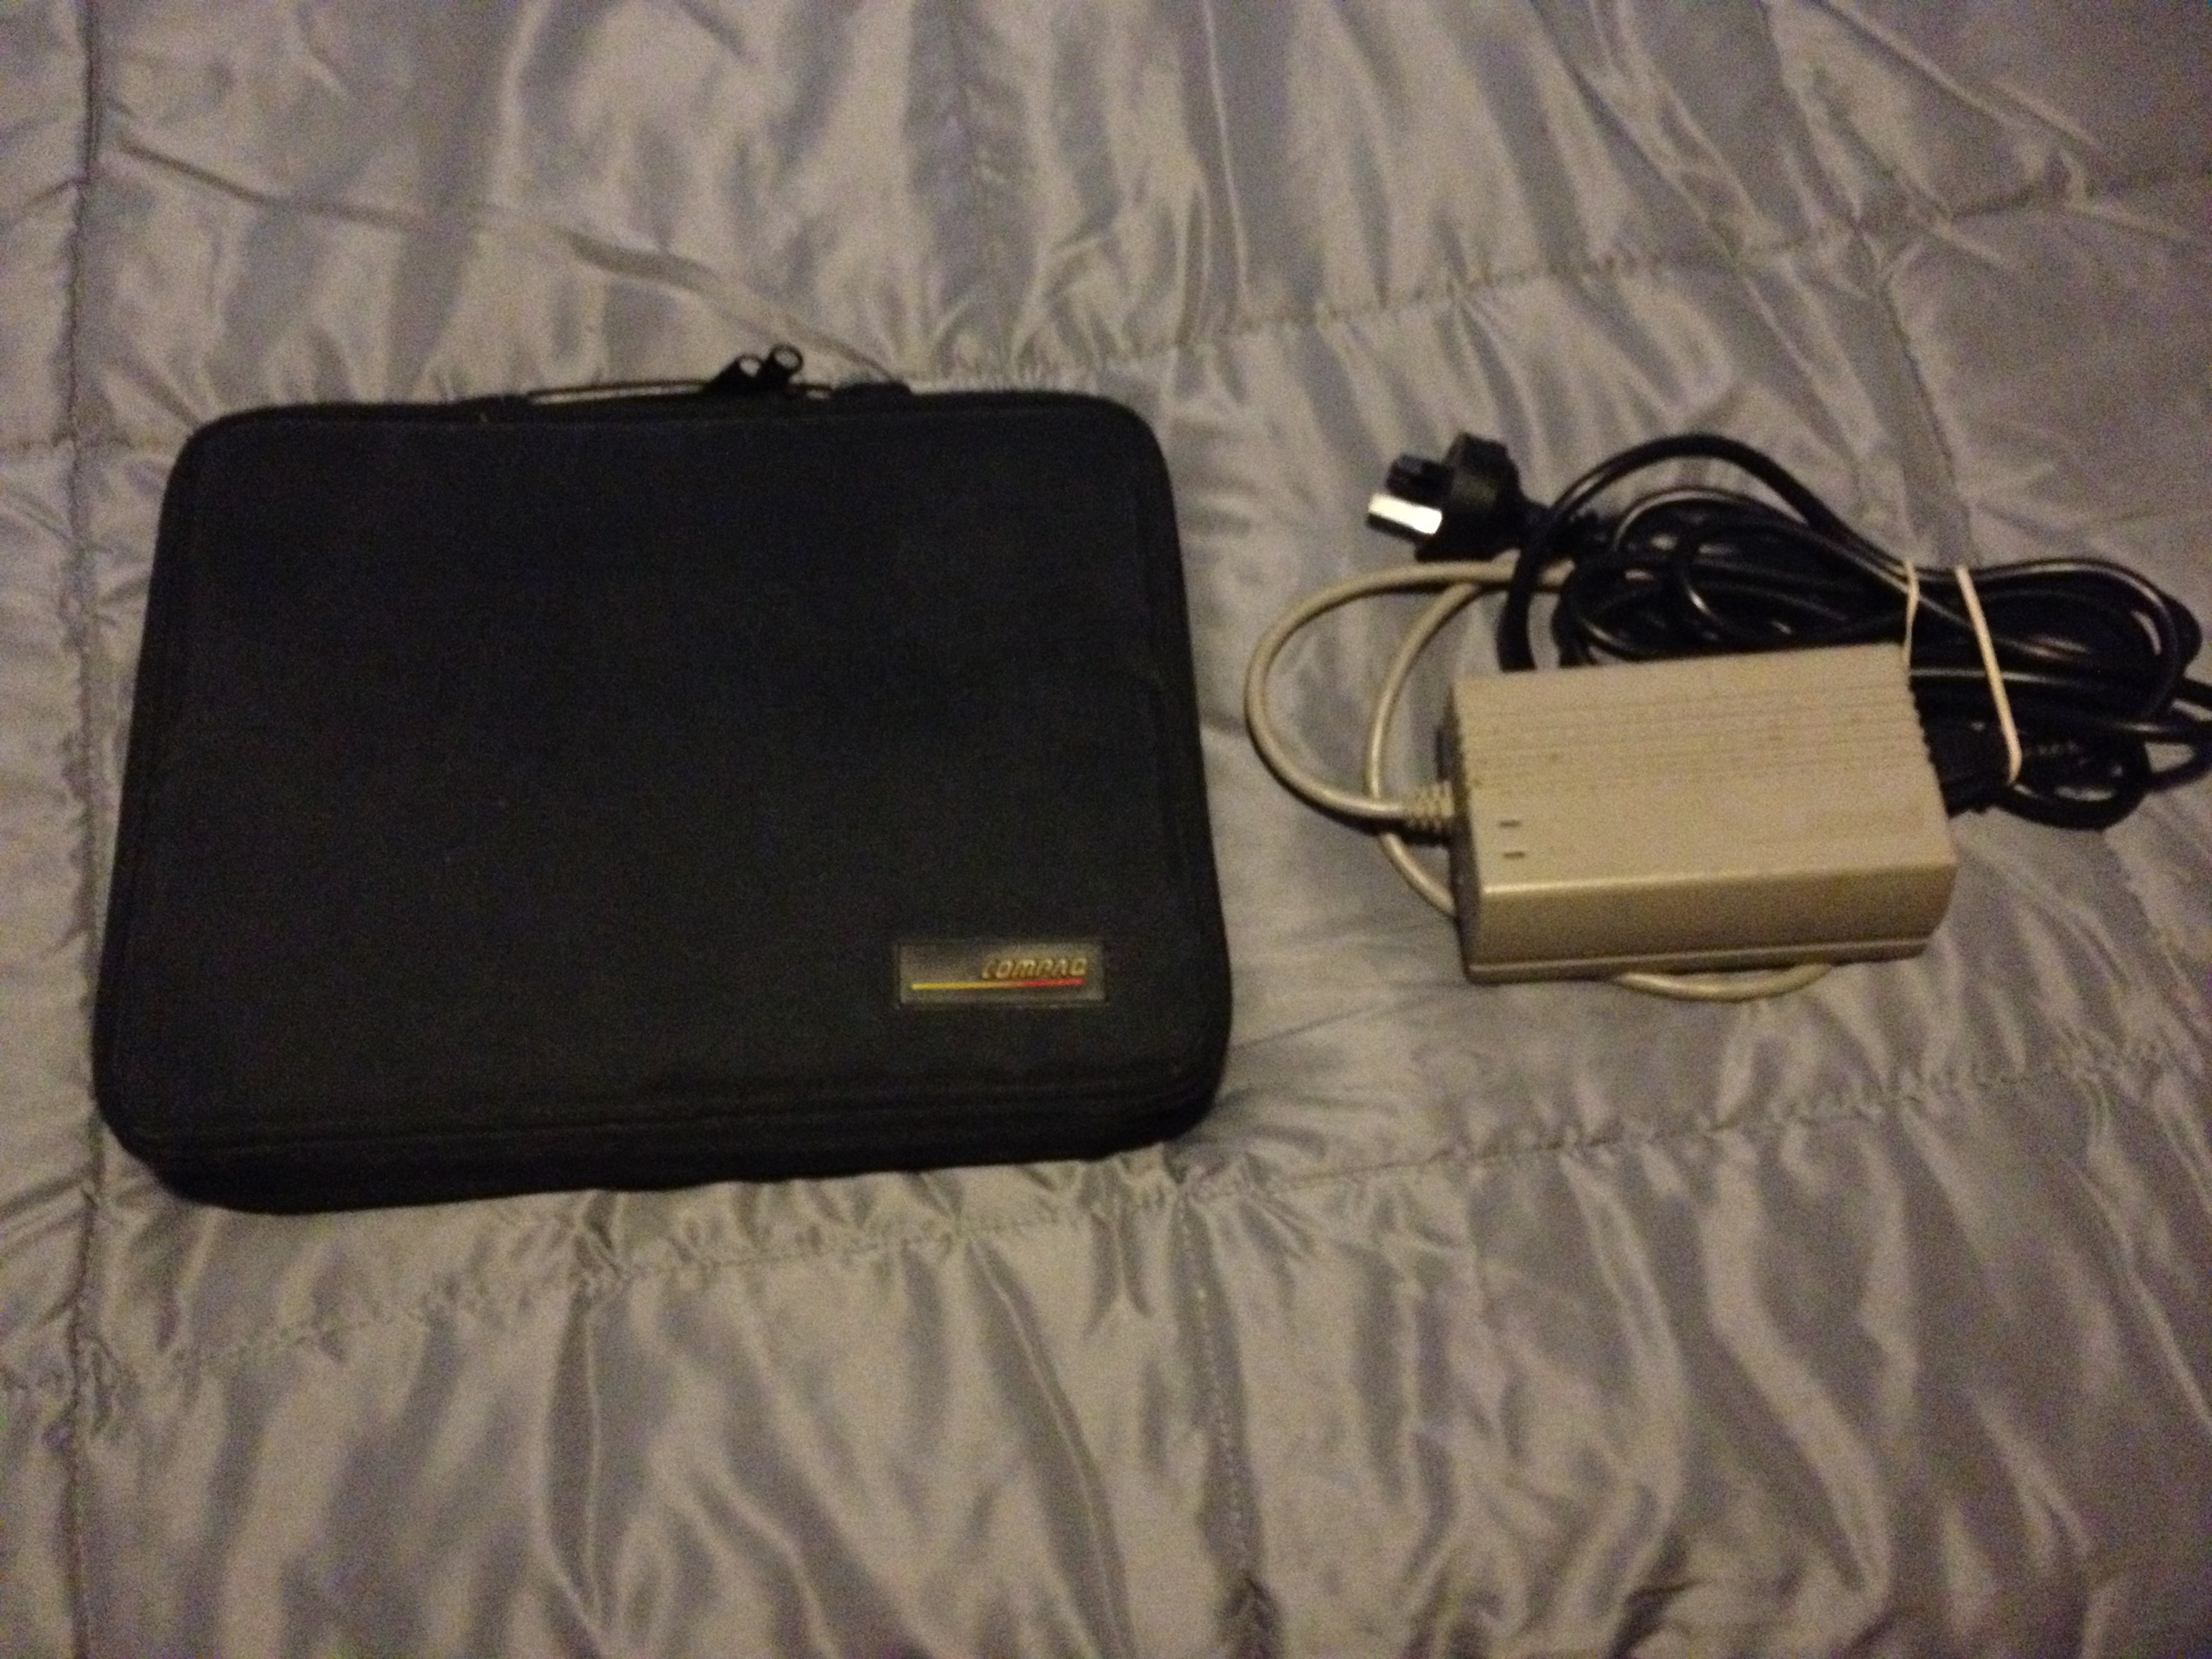 Compaq LTE 286 Bag and Charger